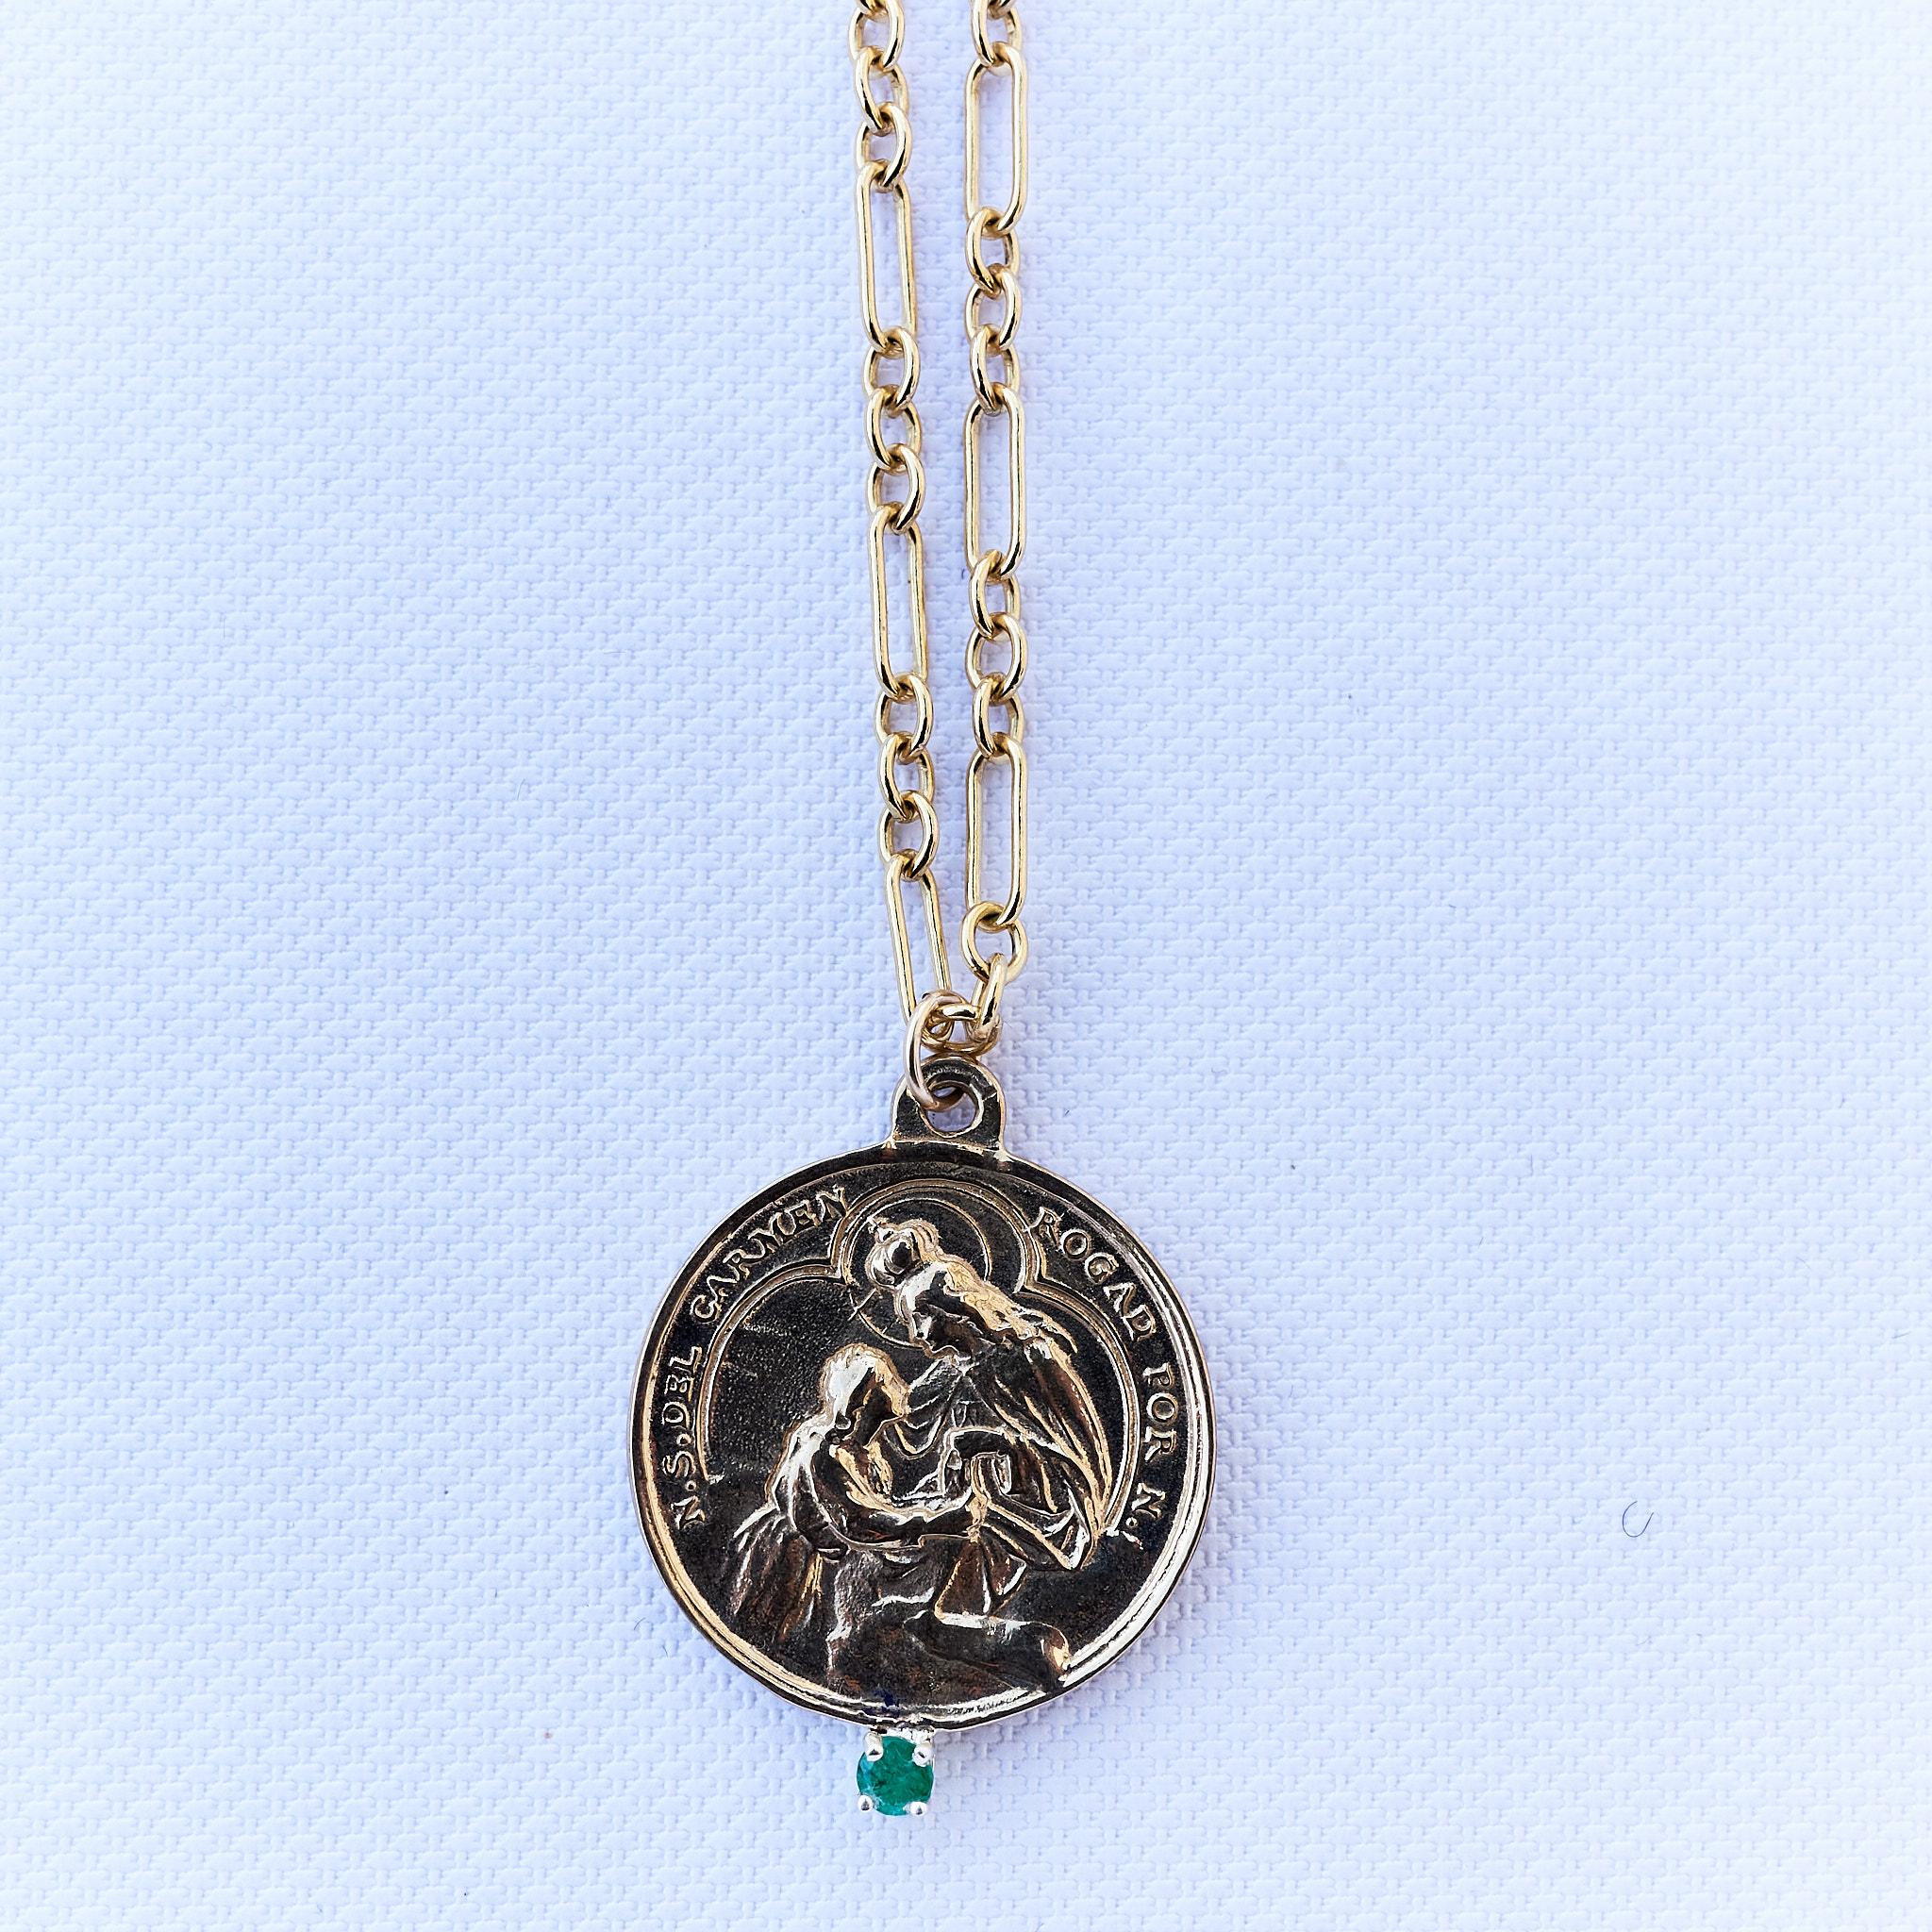 Brilliant Cut Emerald Medal Necklace Virgin Mary Chain J Dauphin For Sale